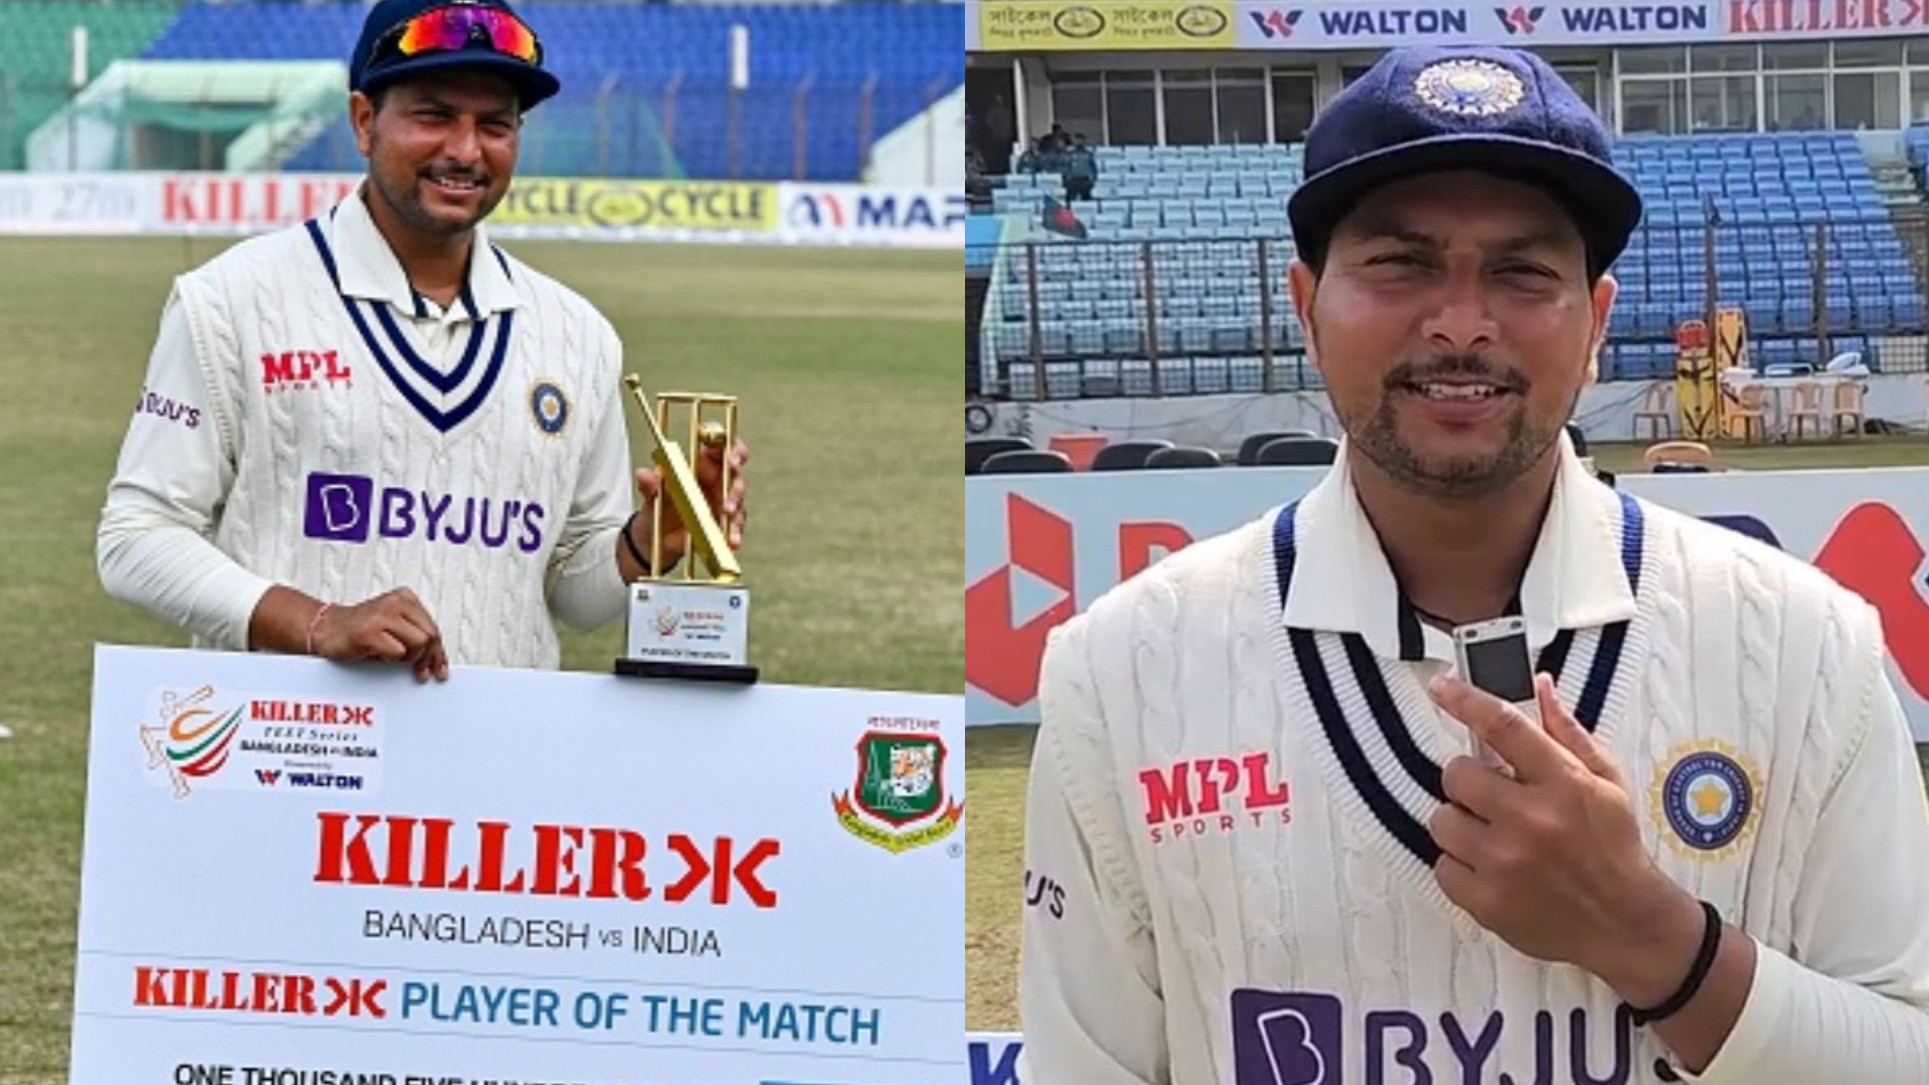 BAN v IND 2022: “I am very happy with my performance”- Kuldeep Yadav after Player of the Match outing in 1st Test